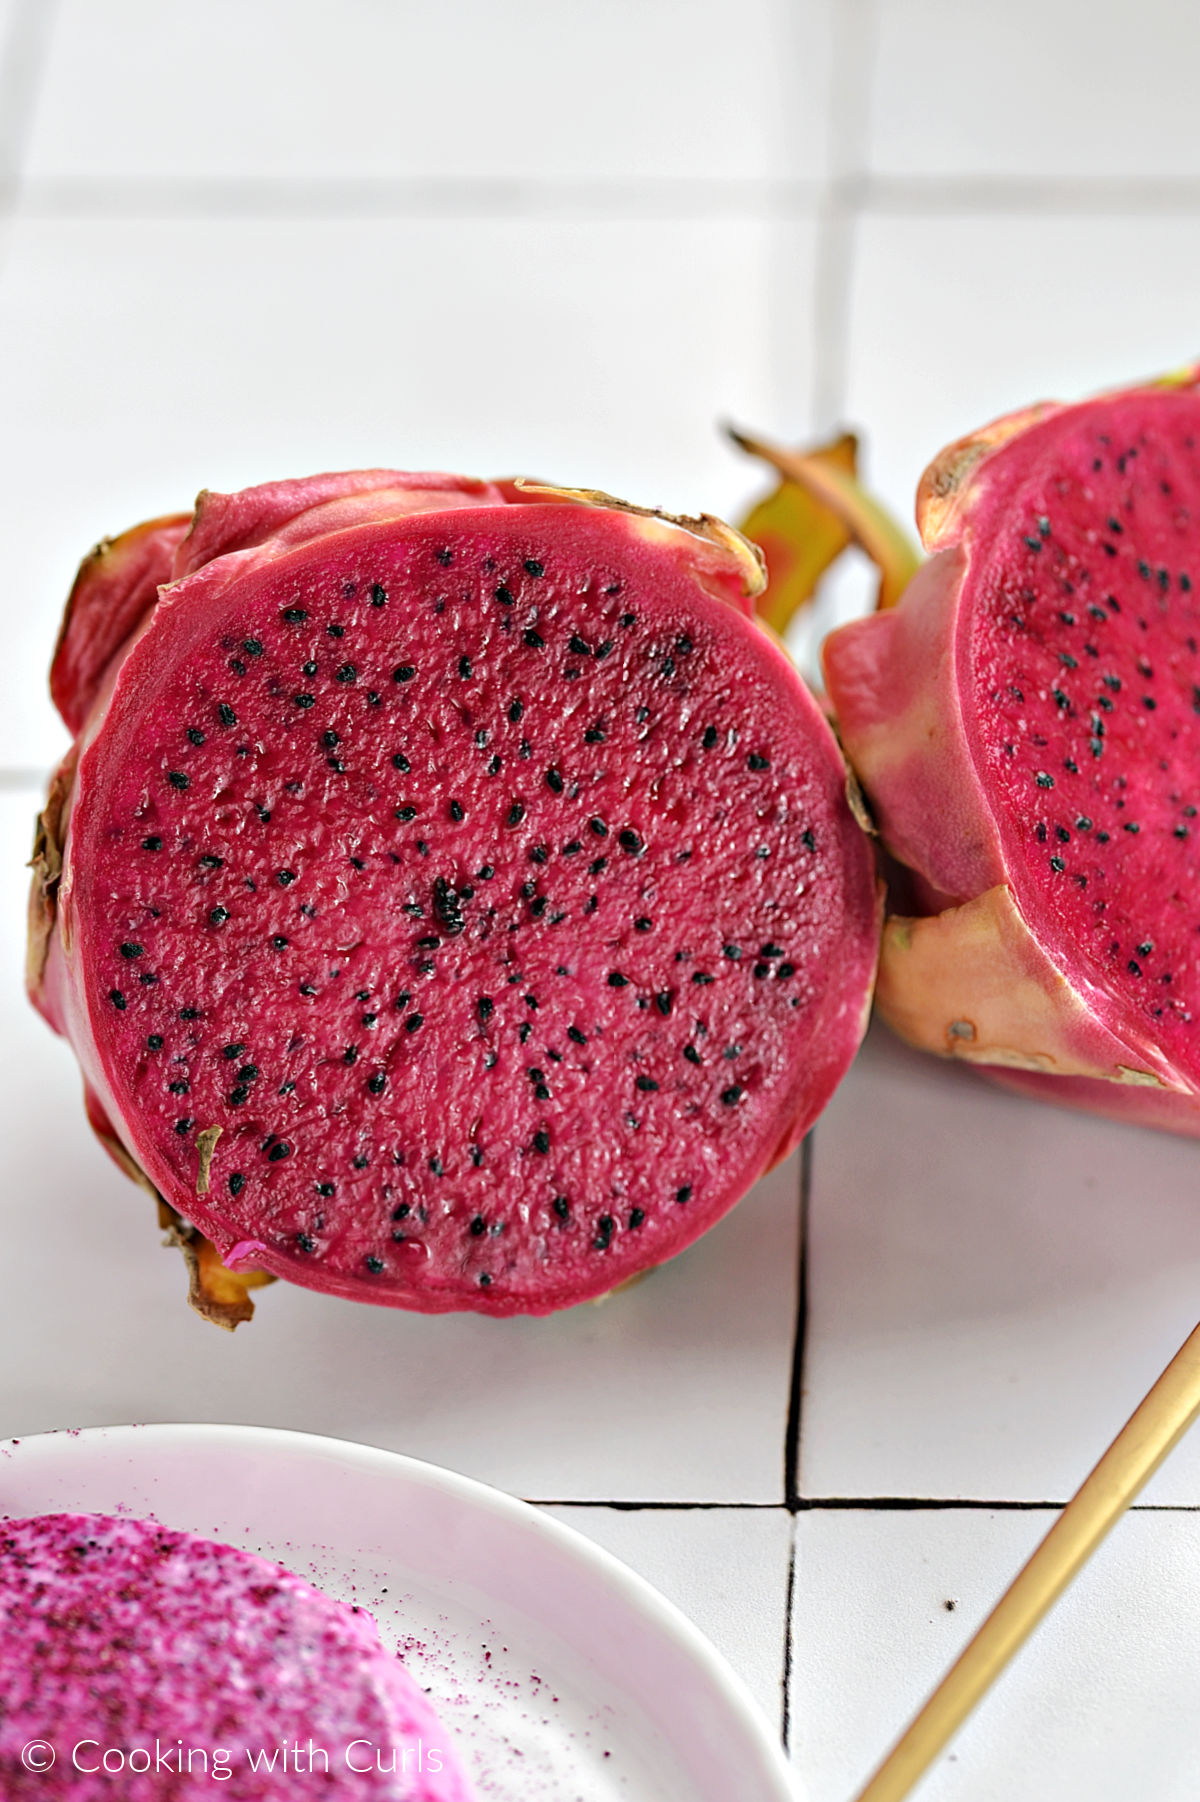 A red dragon fruit that has been sliced in half.